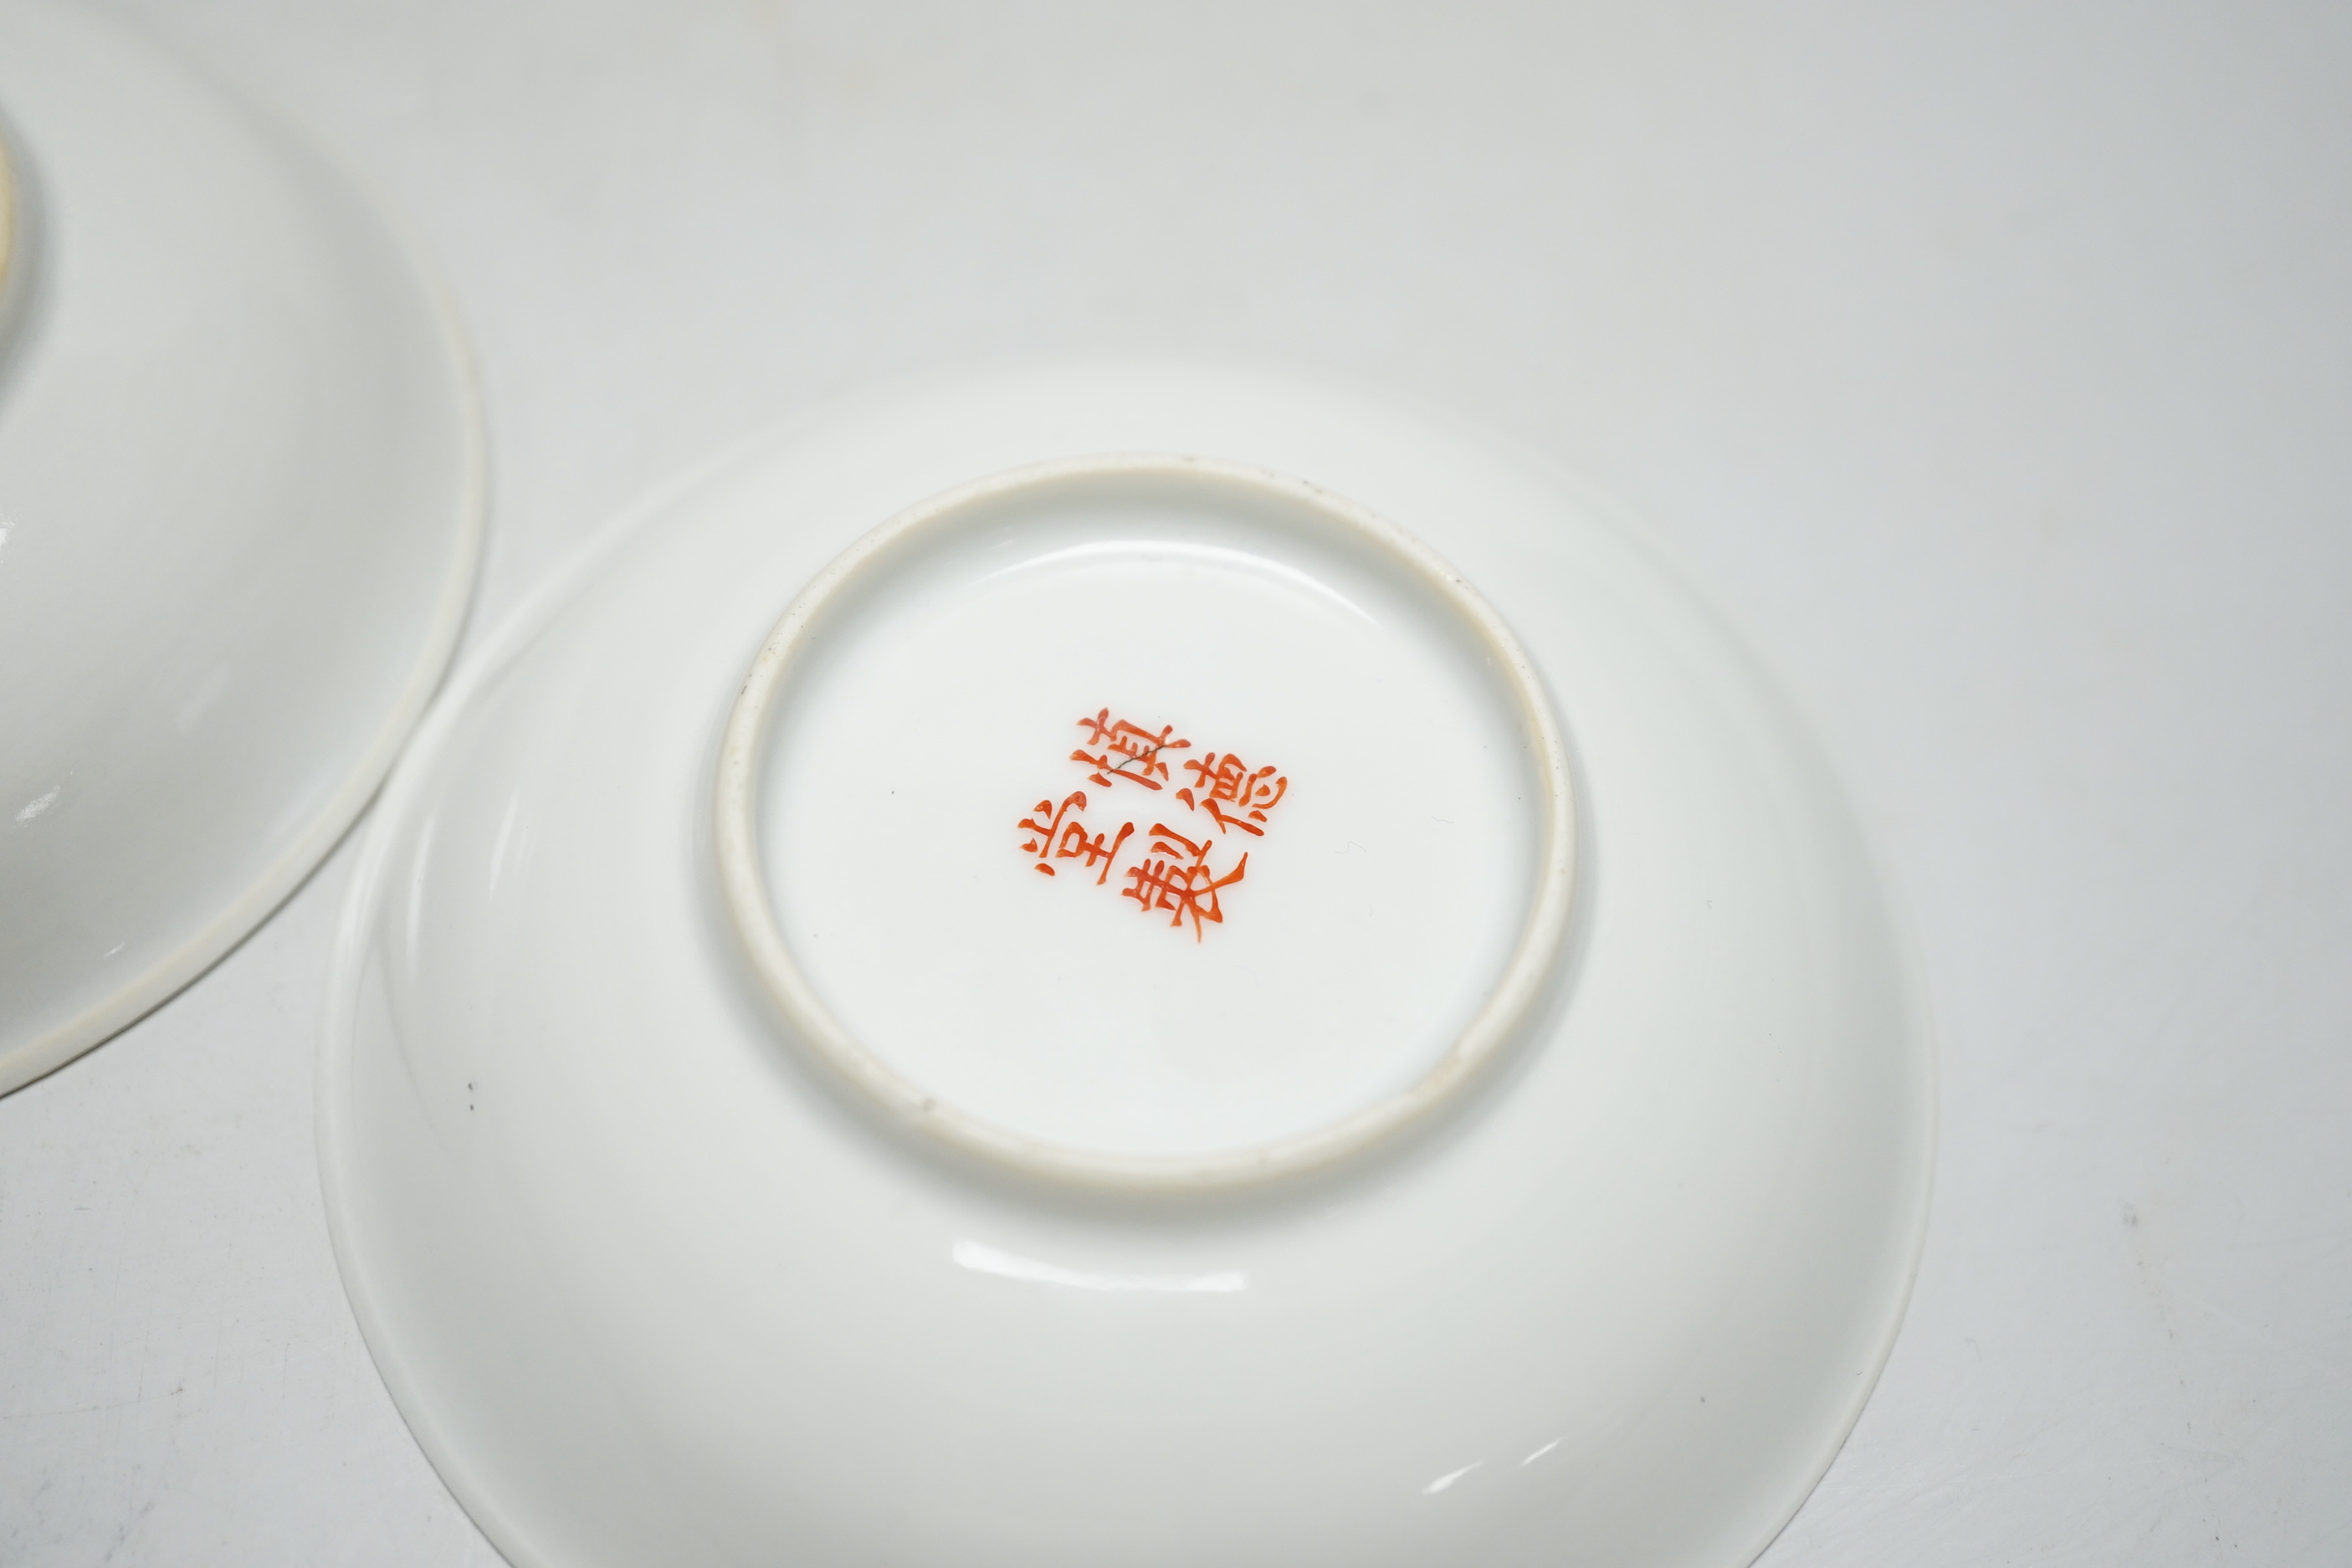 A pair of Chinese calligraphic enamelled porcelain saucers, 9.5cm